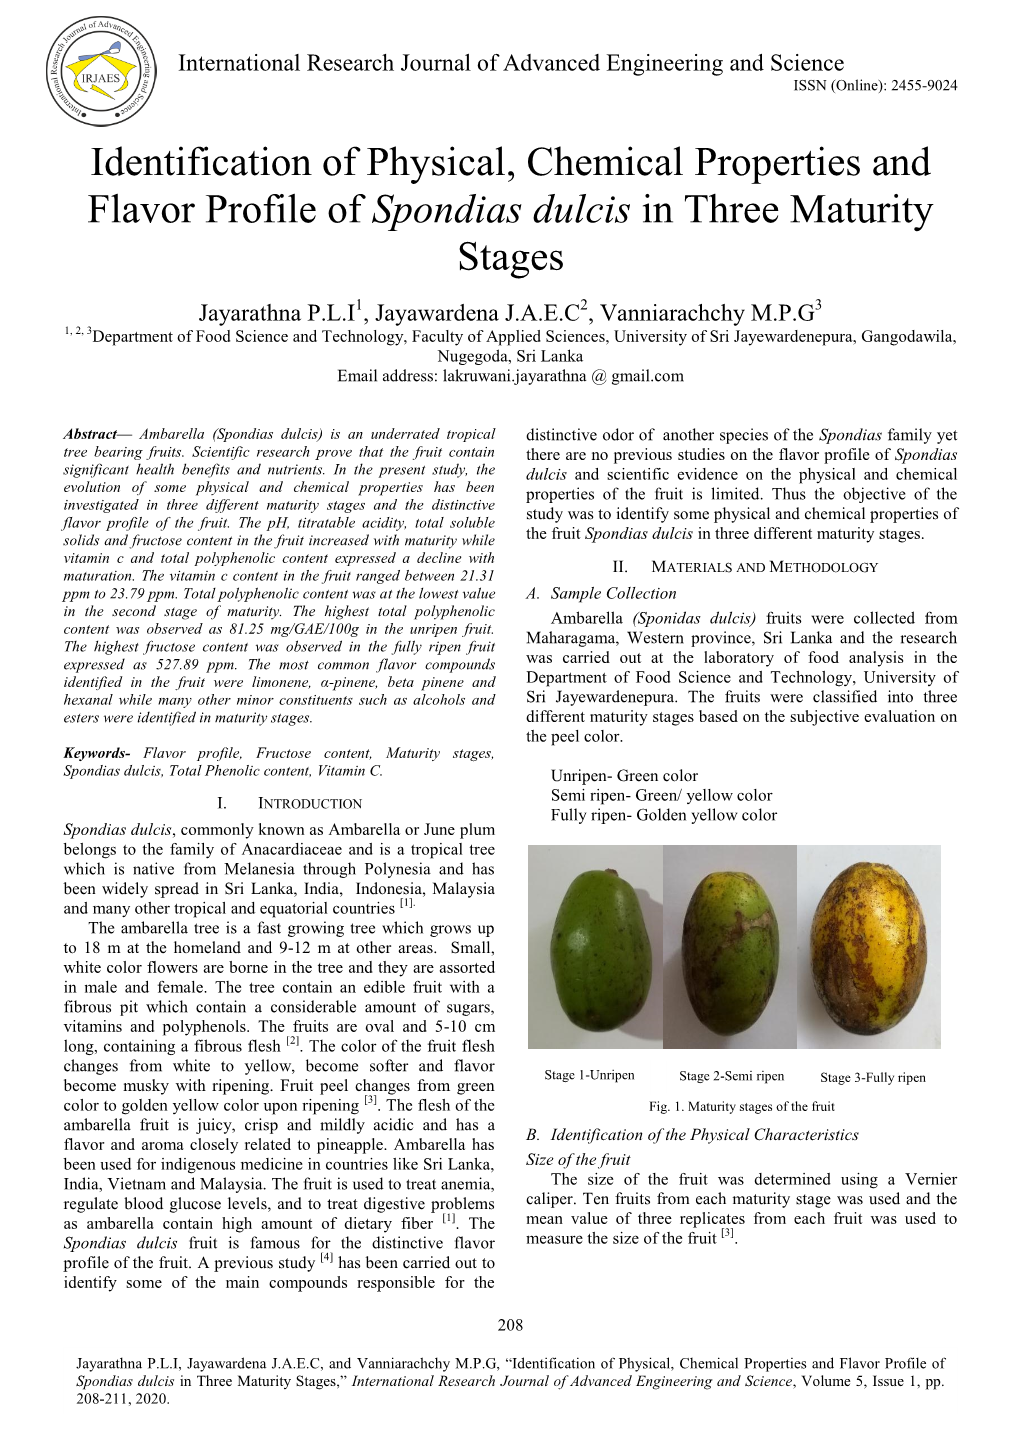 Identification of Physical, Chemical Properties and Flavor Profile of Spondias Dulcis in Three Maturity